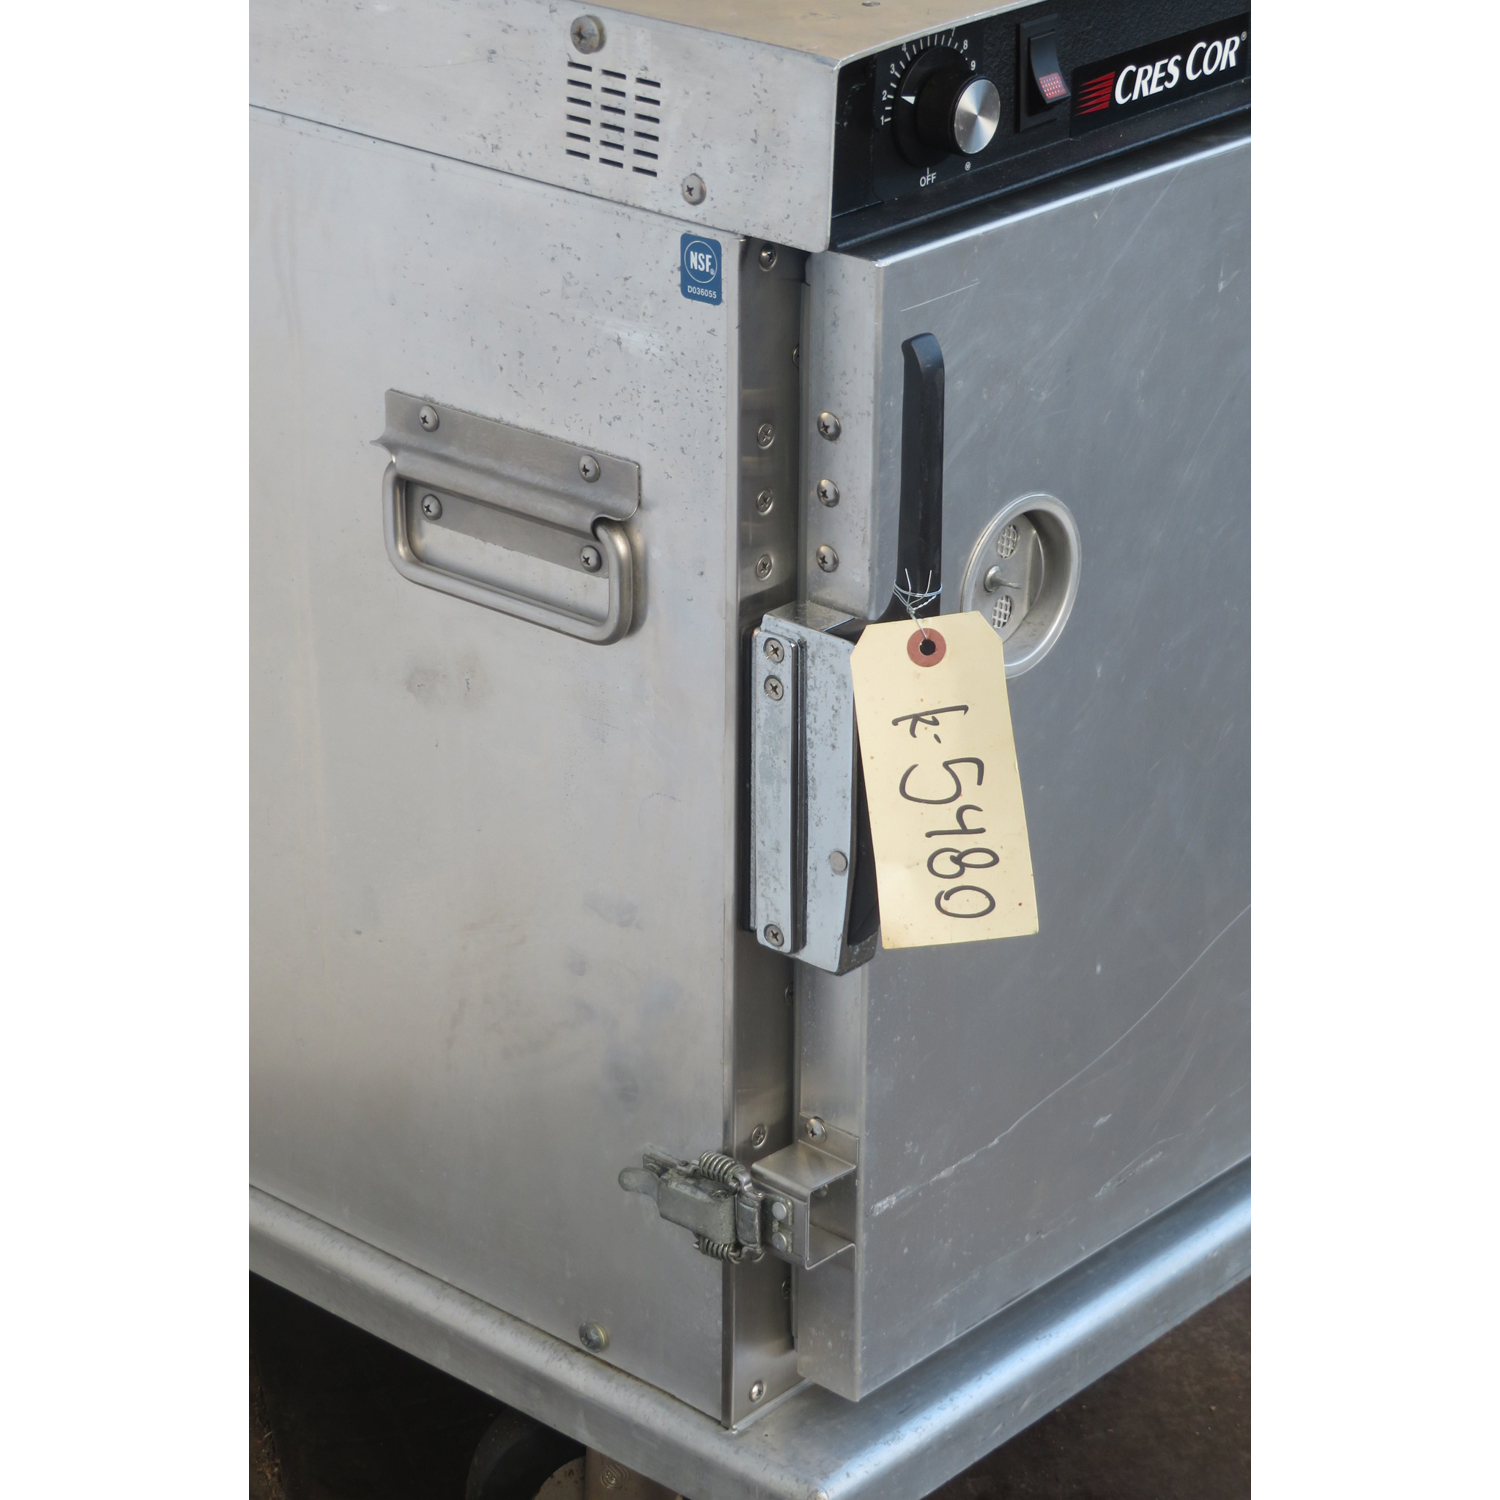 Cres Cor H339-12-135CT Insulated Half-Size Hot Cabinet, Used Excellent Condition image 4